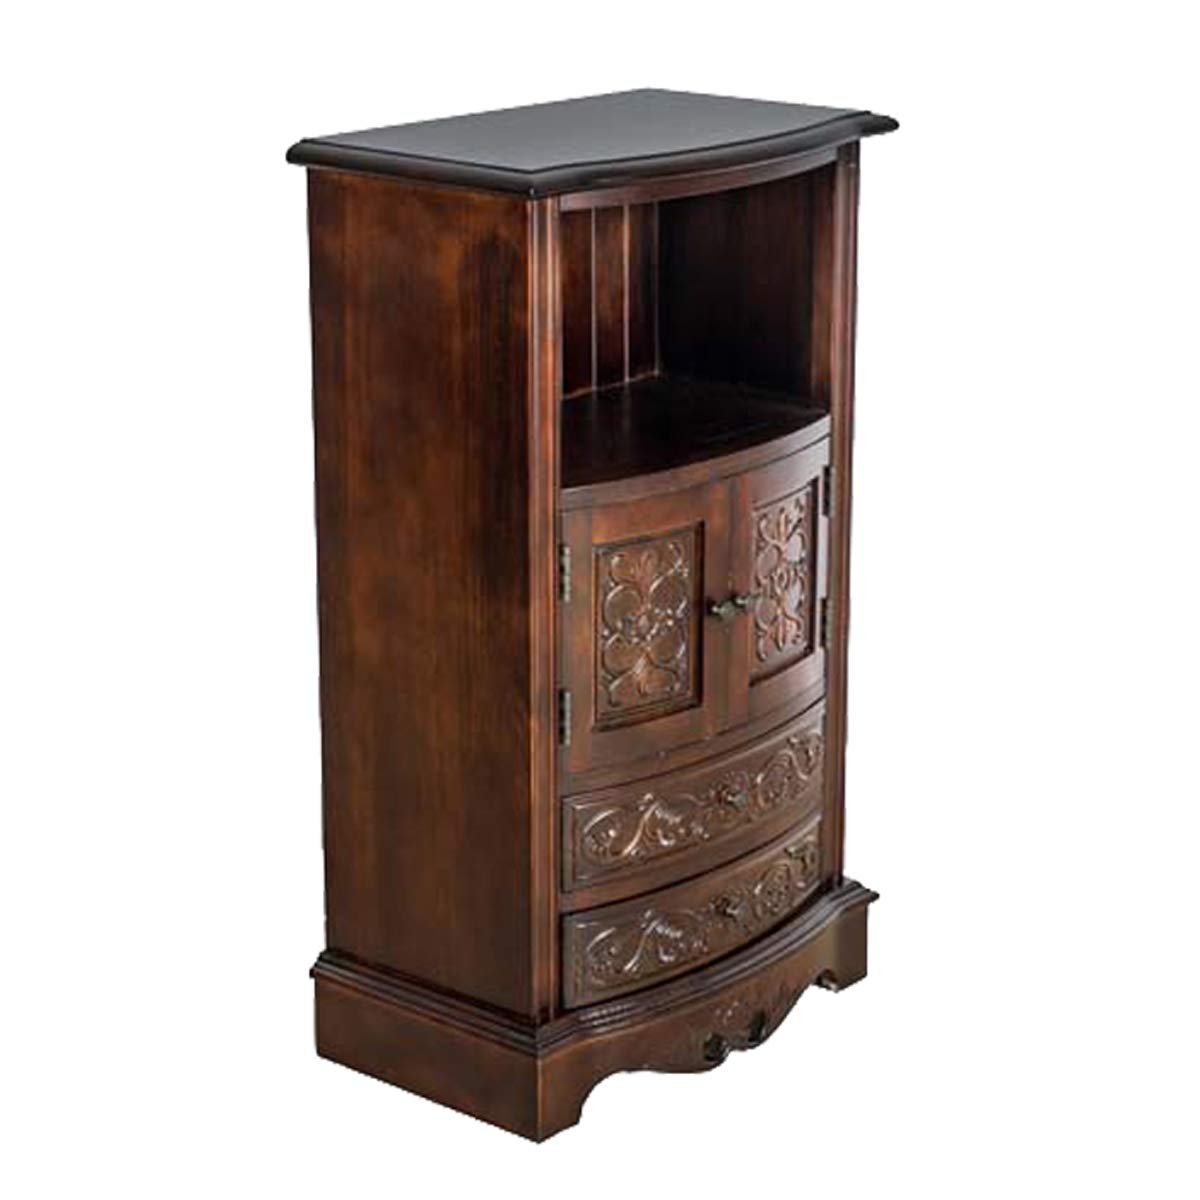 Benjara Engraved Wooden Frame Storage Cabinet With 2 Drawers And 2 Doors, Brown